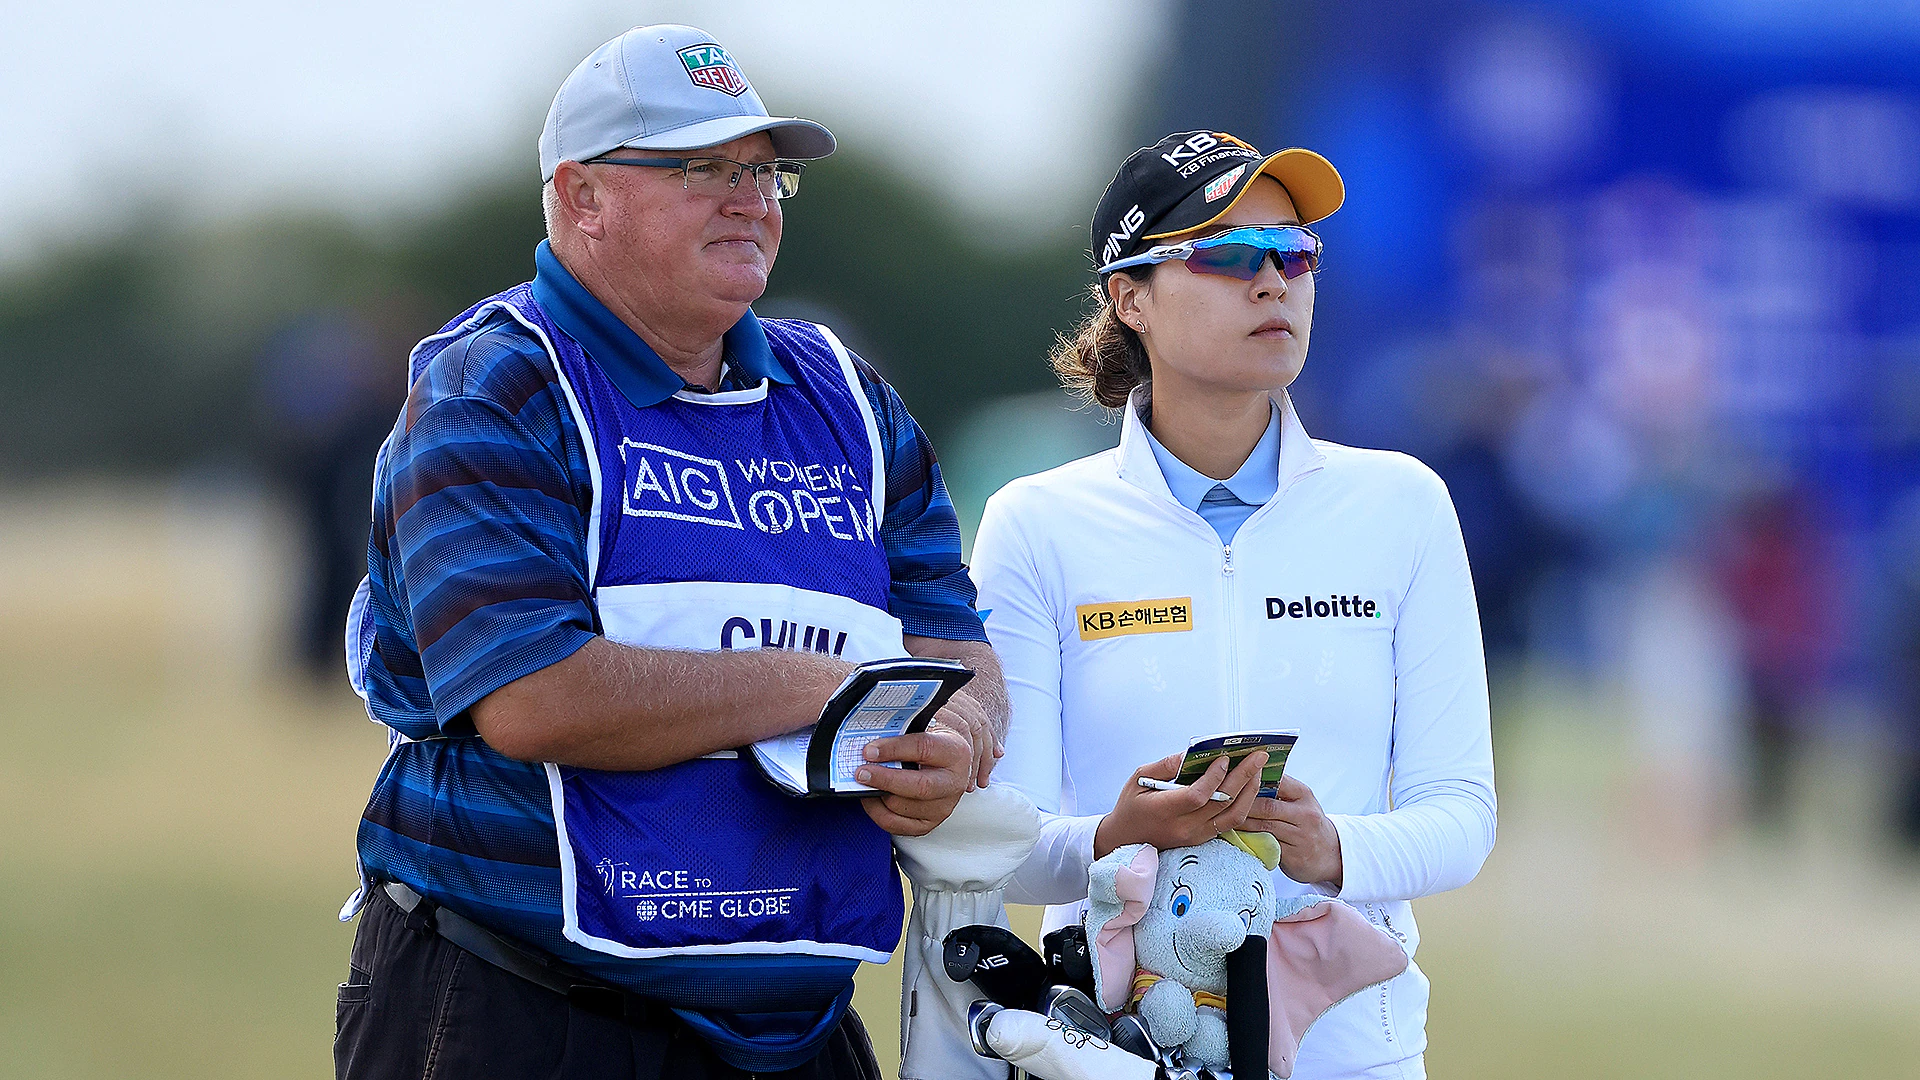 AIG Women’s Open: Motivated by bet with caddie, In Gee Chun in position for second major win this year